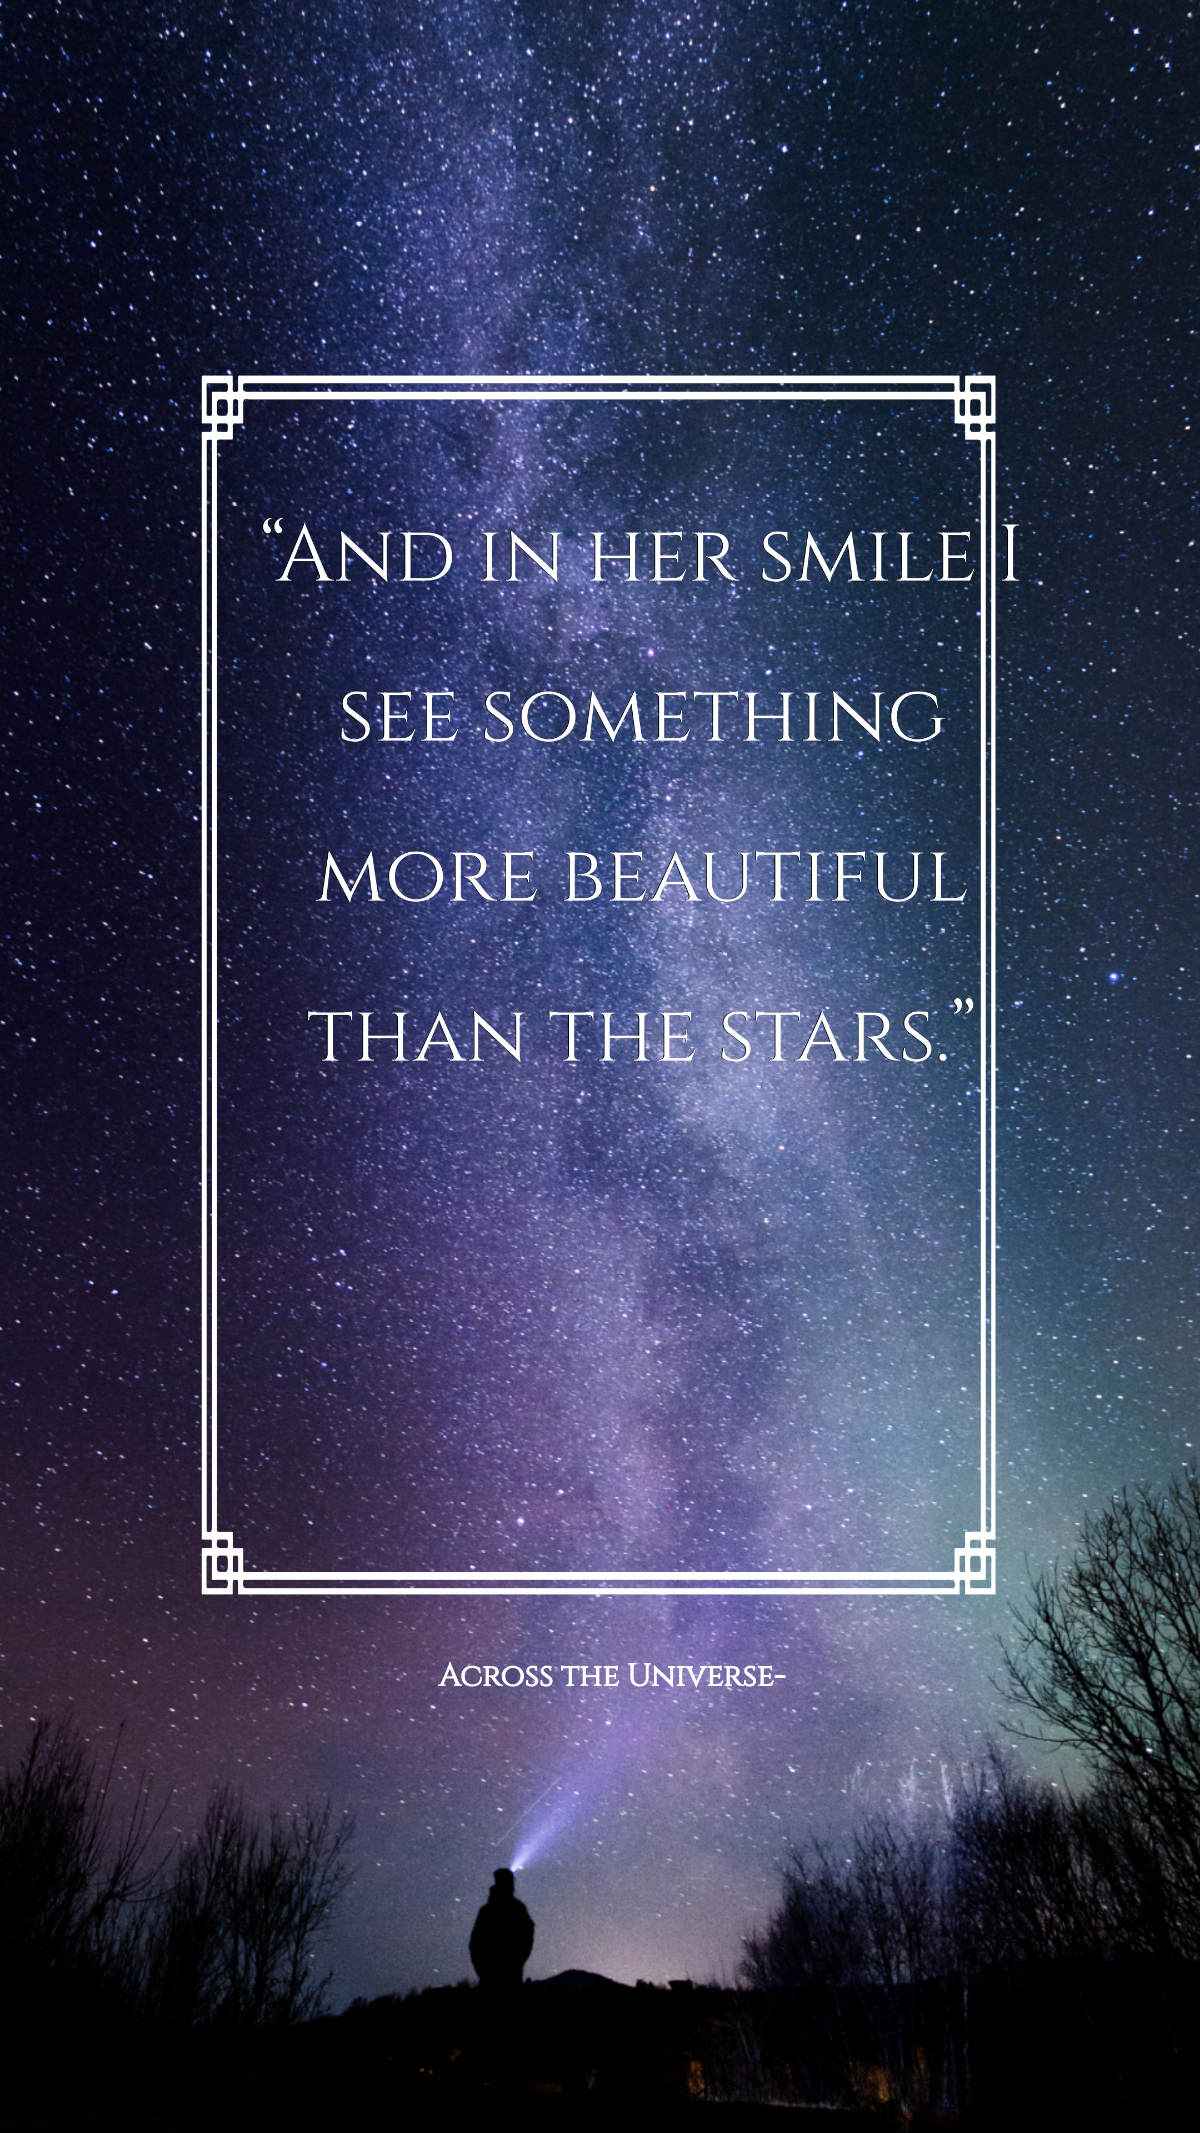 Across the Universe — “And in her smile I see something more beautiful than the stars.” Template